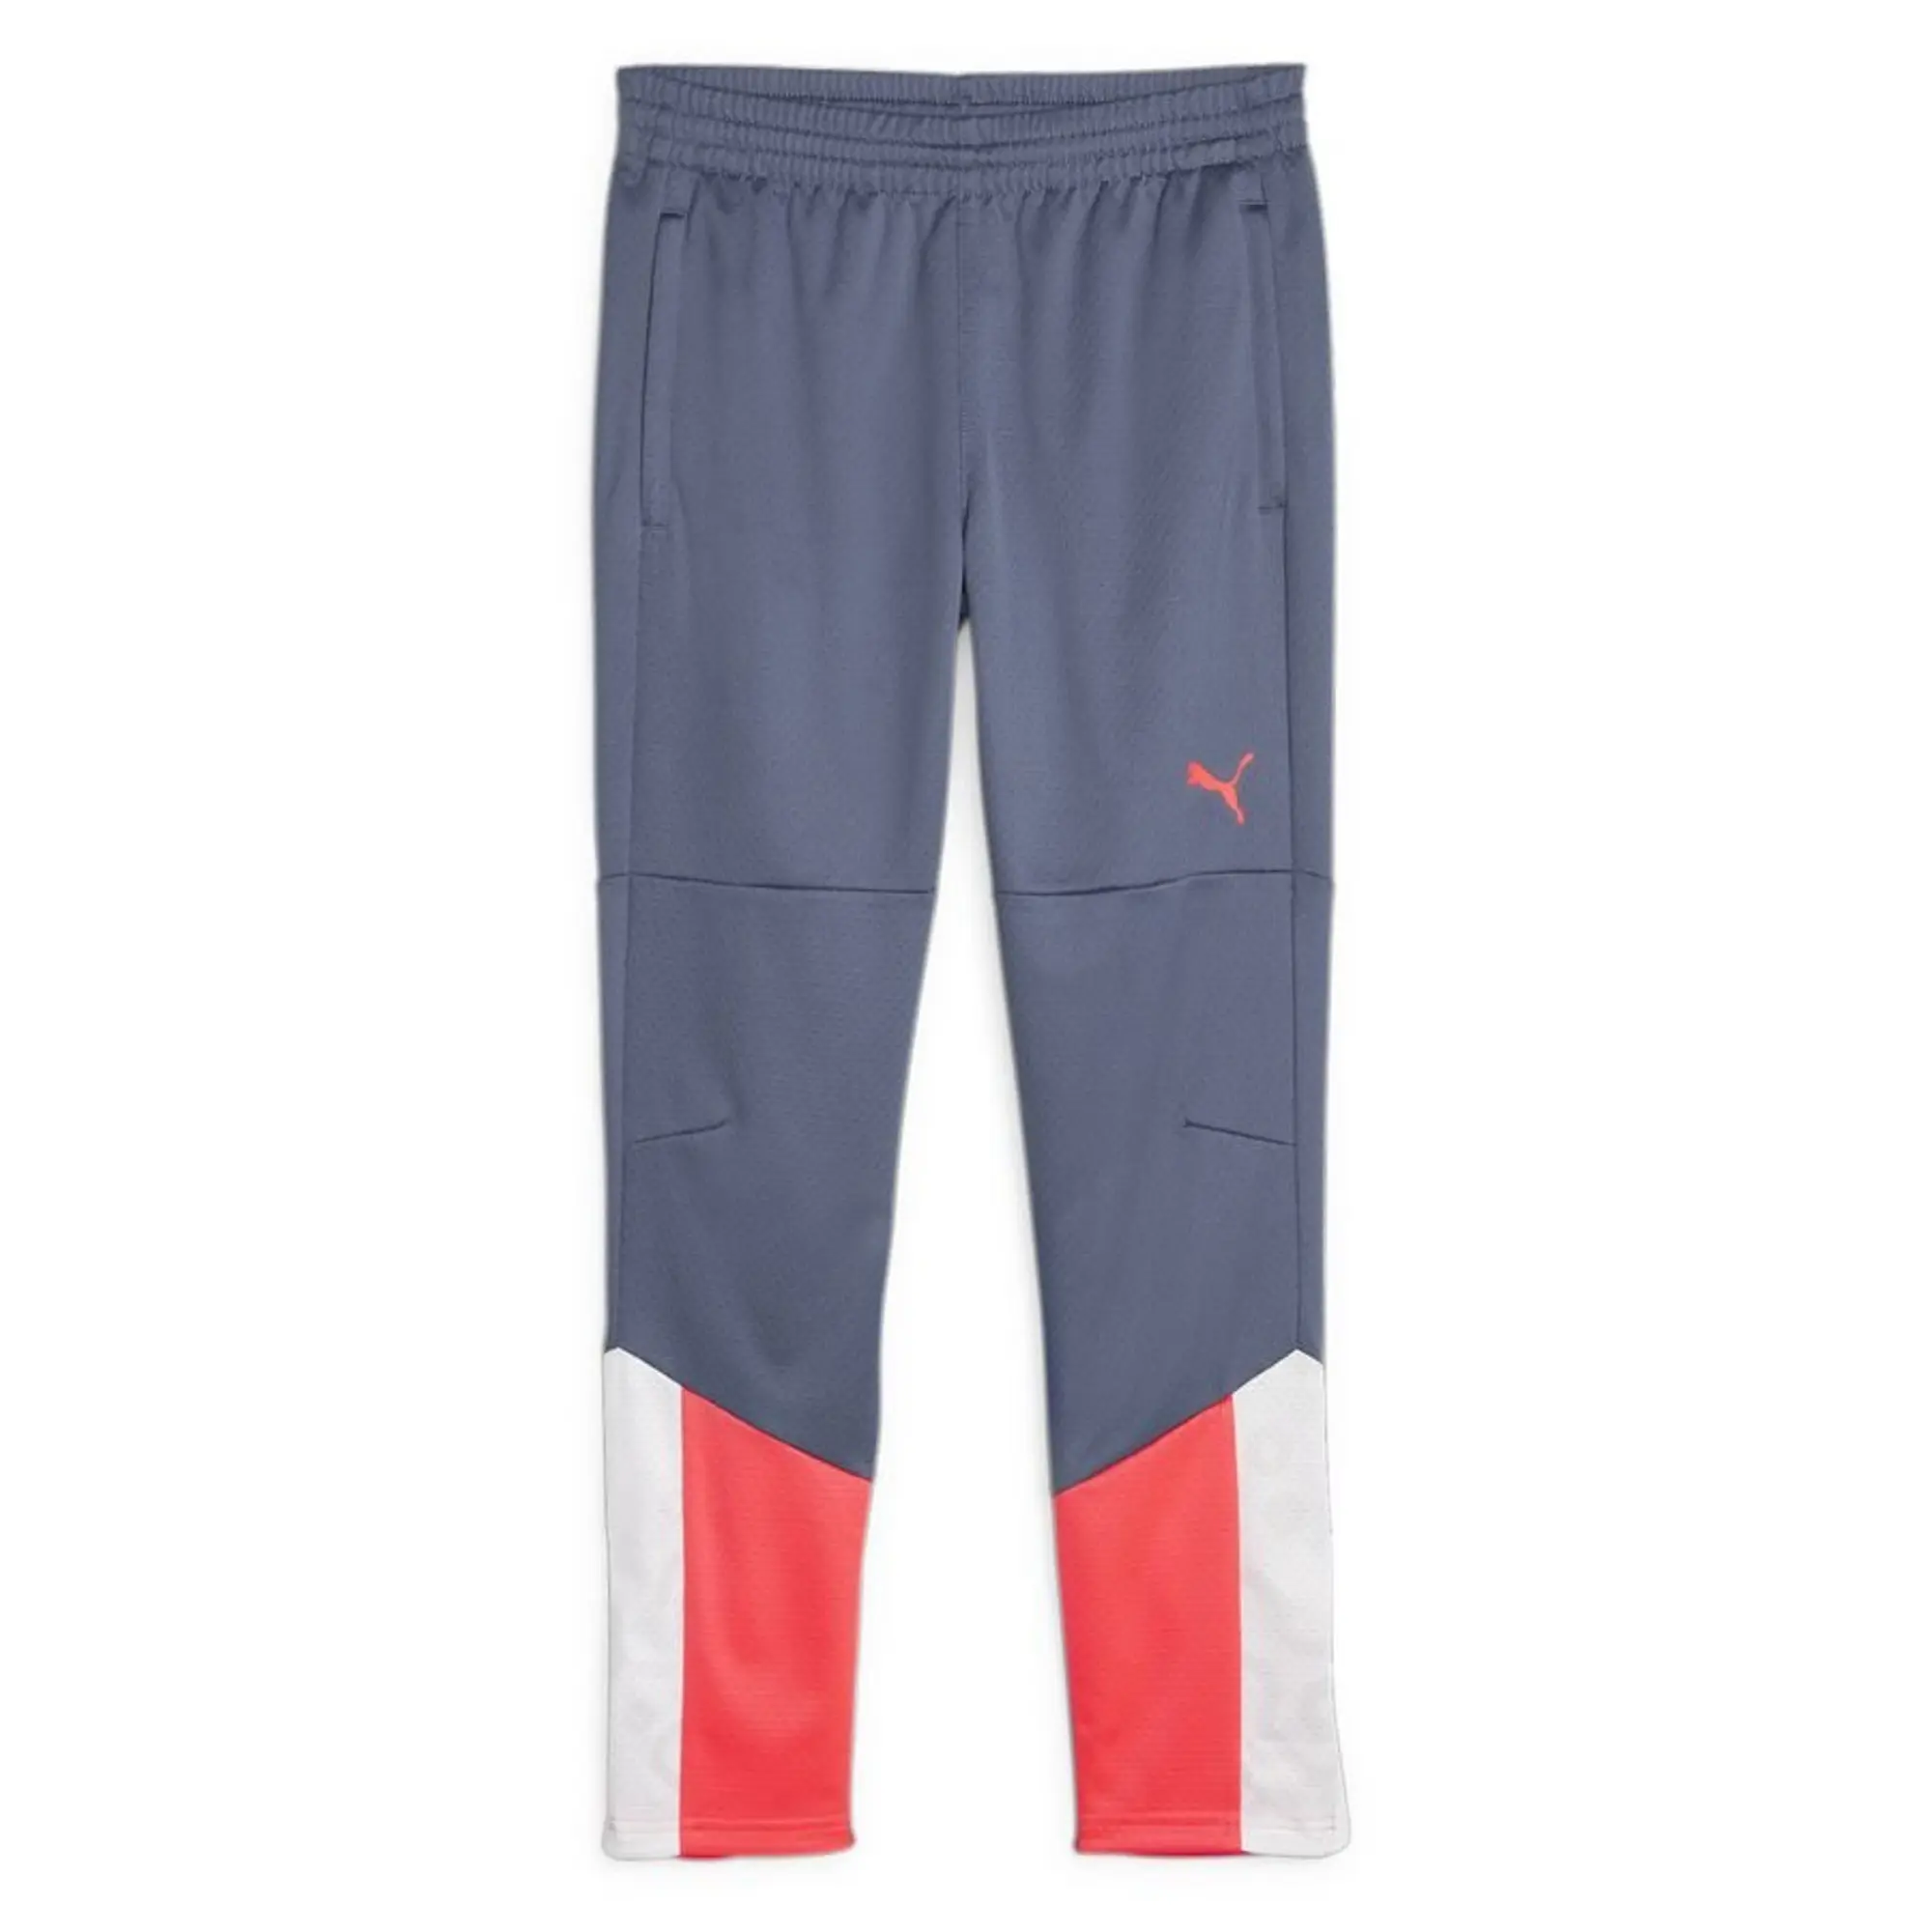 Puma Training Trousers Individualcup - Blue